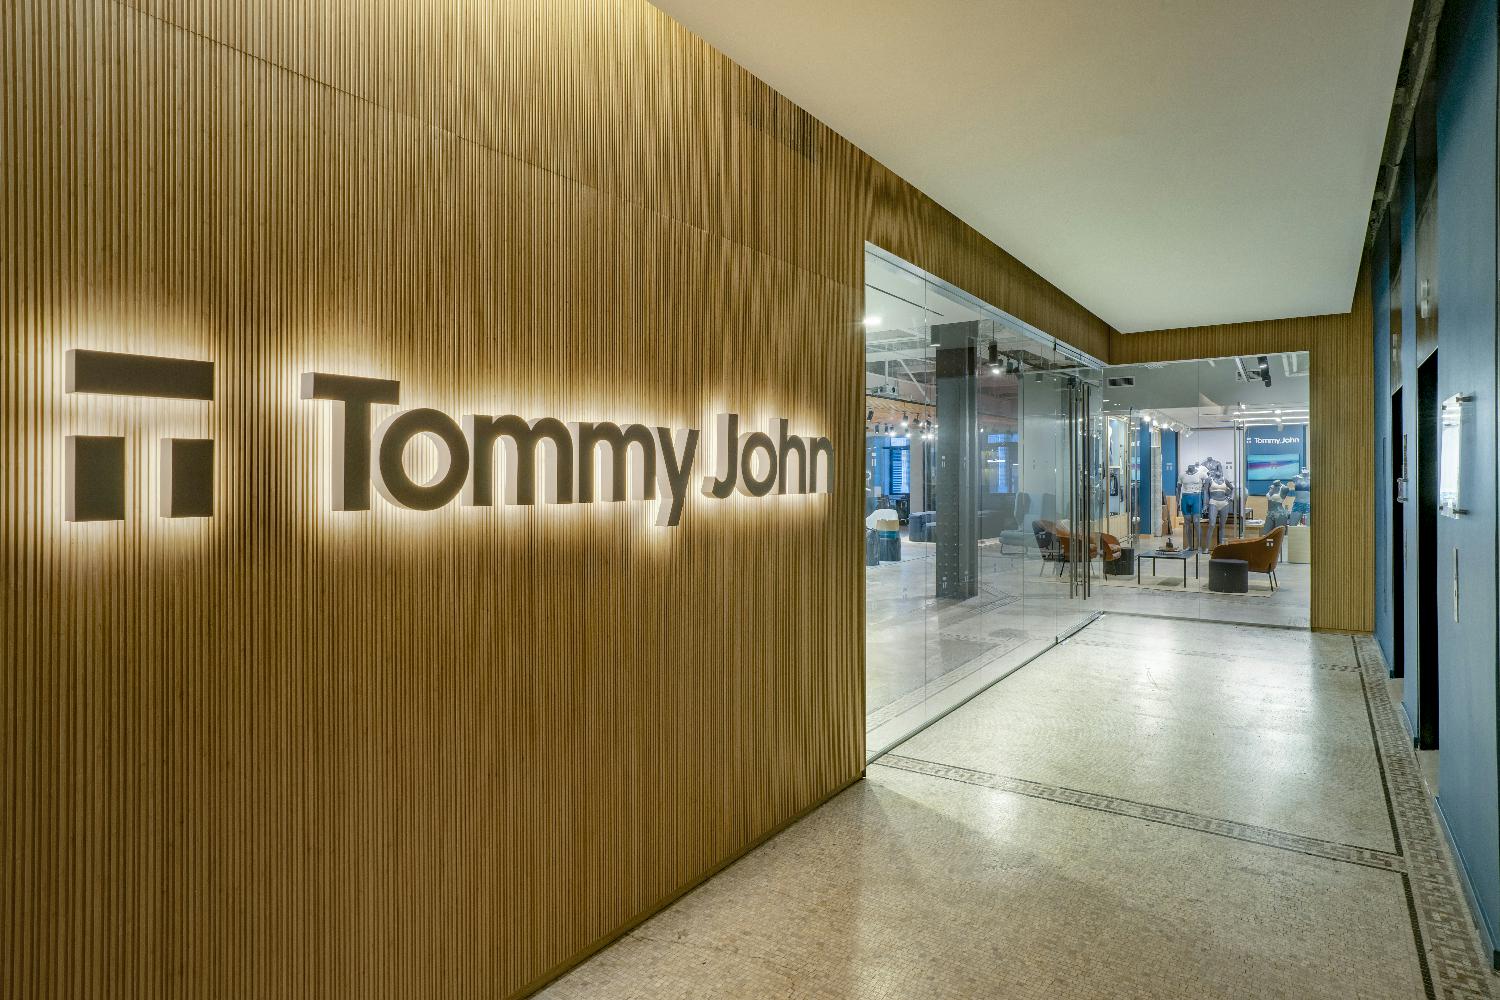 Entering the beautiful Tommy John HQ Office